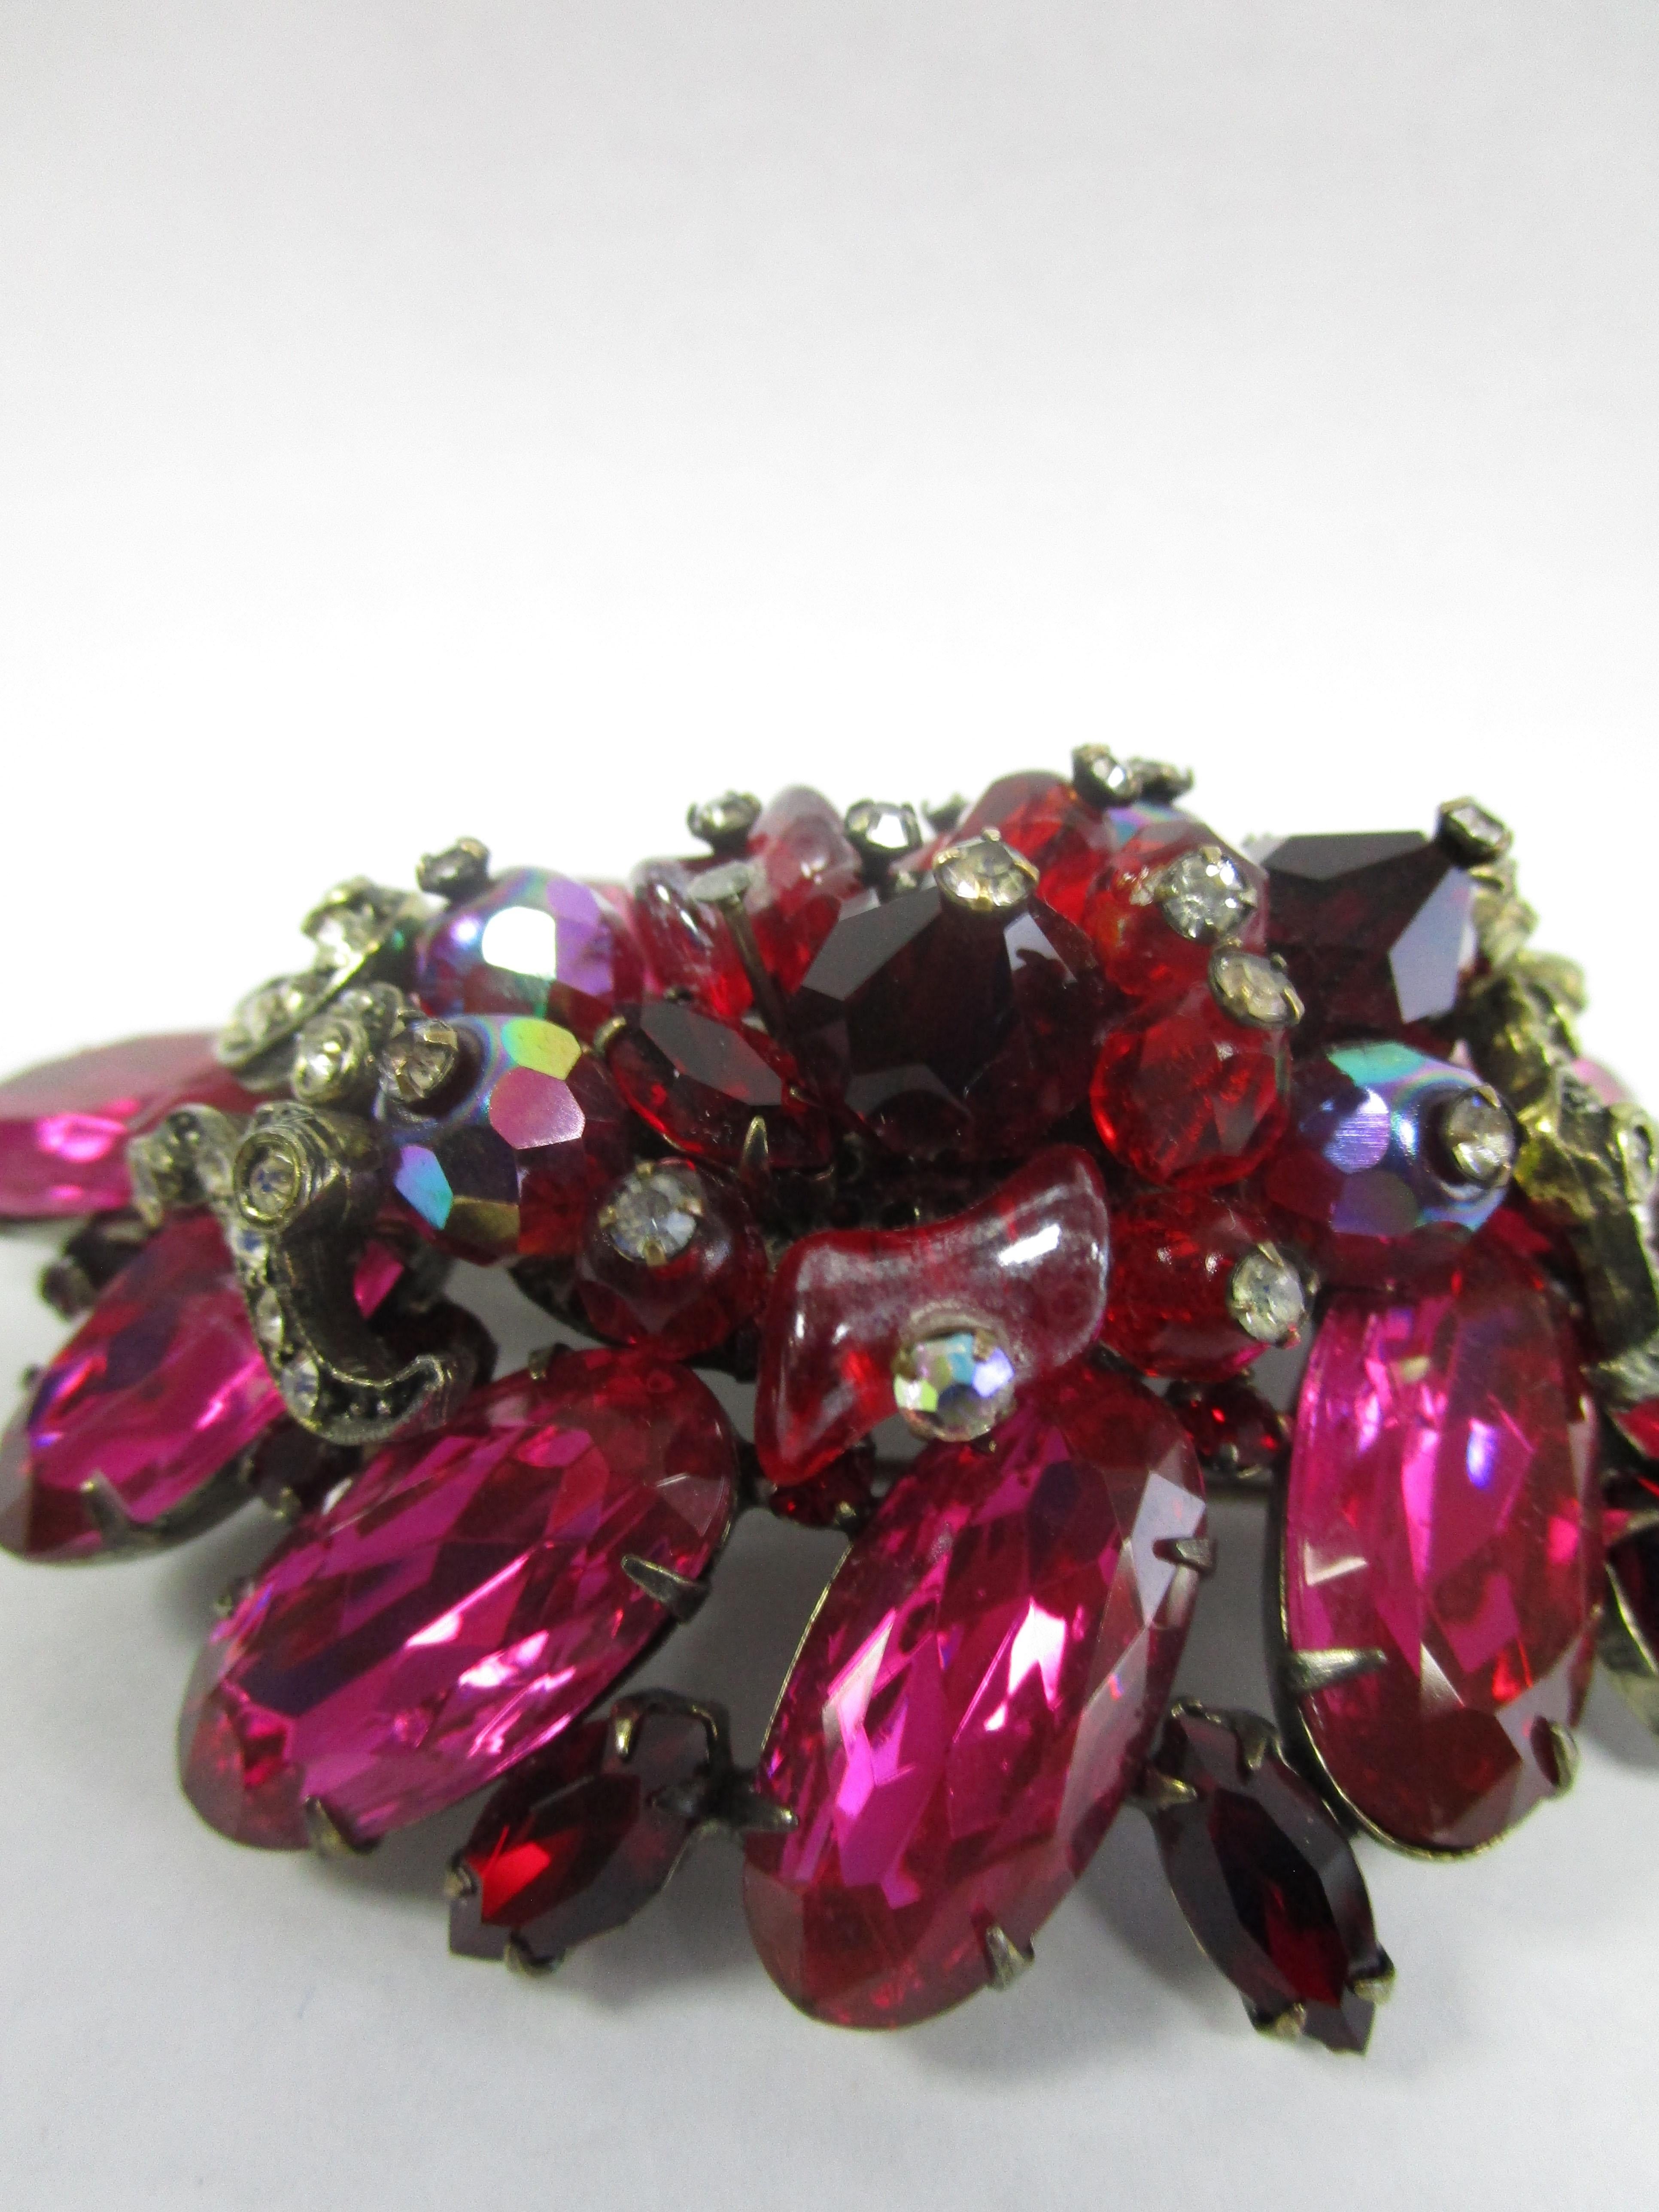 Hattie Carnegie Pink, Red, and Clear Bead and Glass Brooch. We present to you this beautiful and romantic berry colored glass brooch from Hattie Carnegie! It features an array of reds, pinks, purples and clear cut stones and faceted beads. Red glass